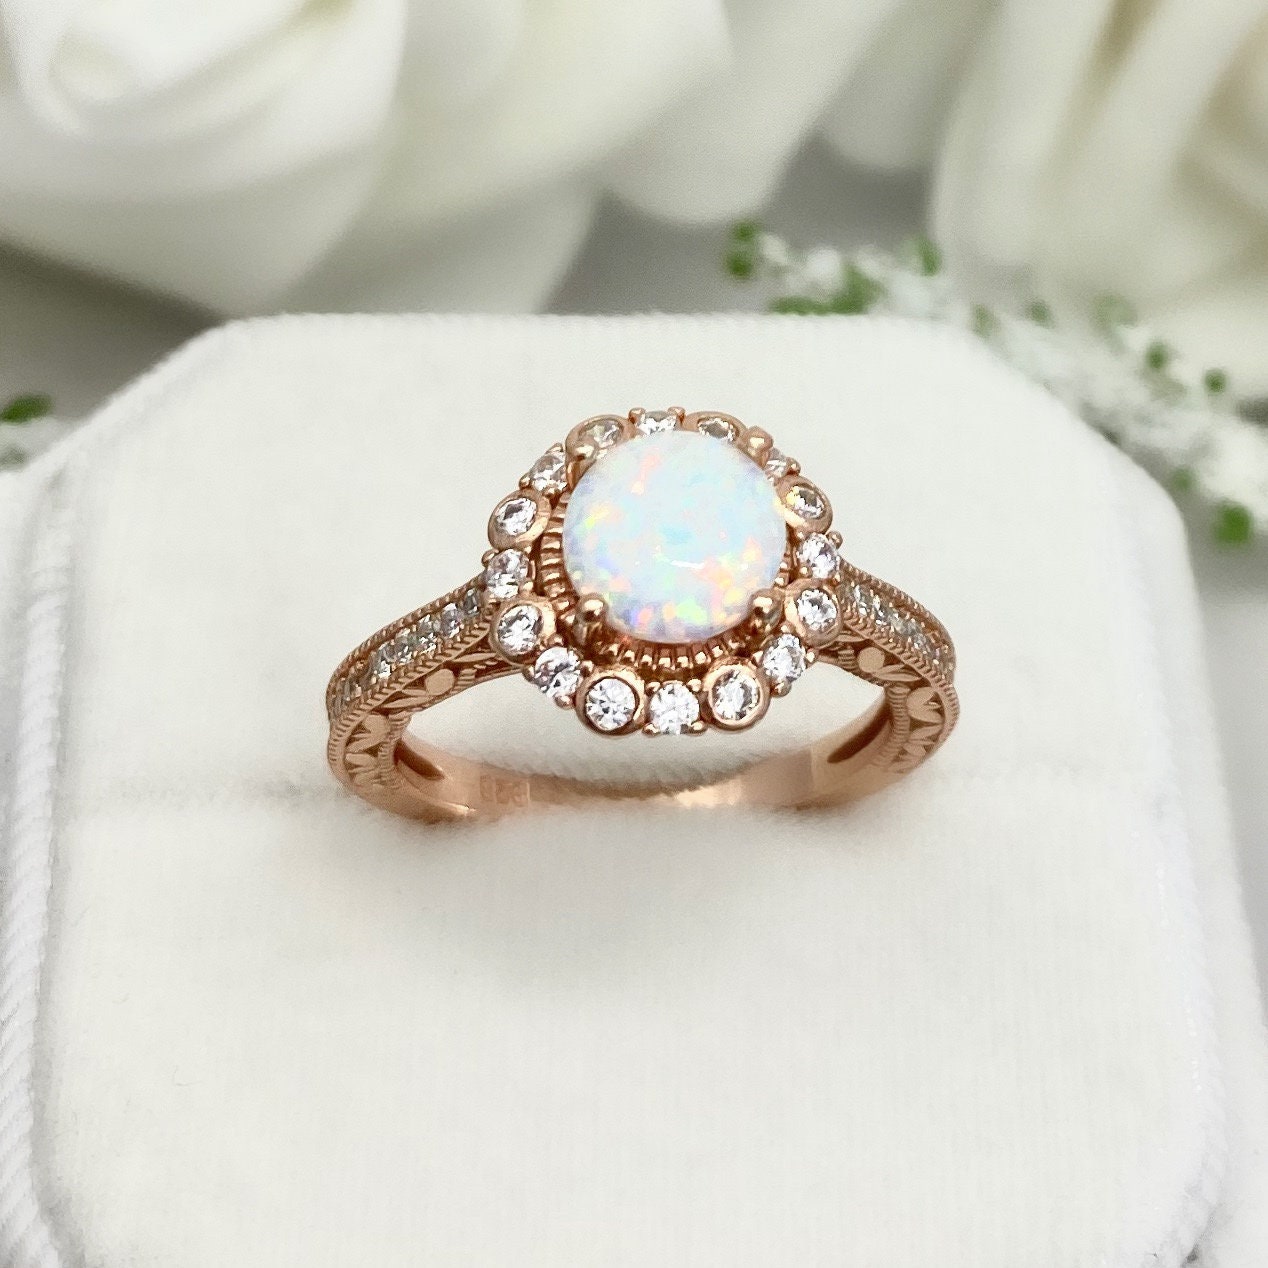 Rose Gold Round White Fire Opal Simulated Diamond Ring Art | Etsy